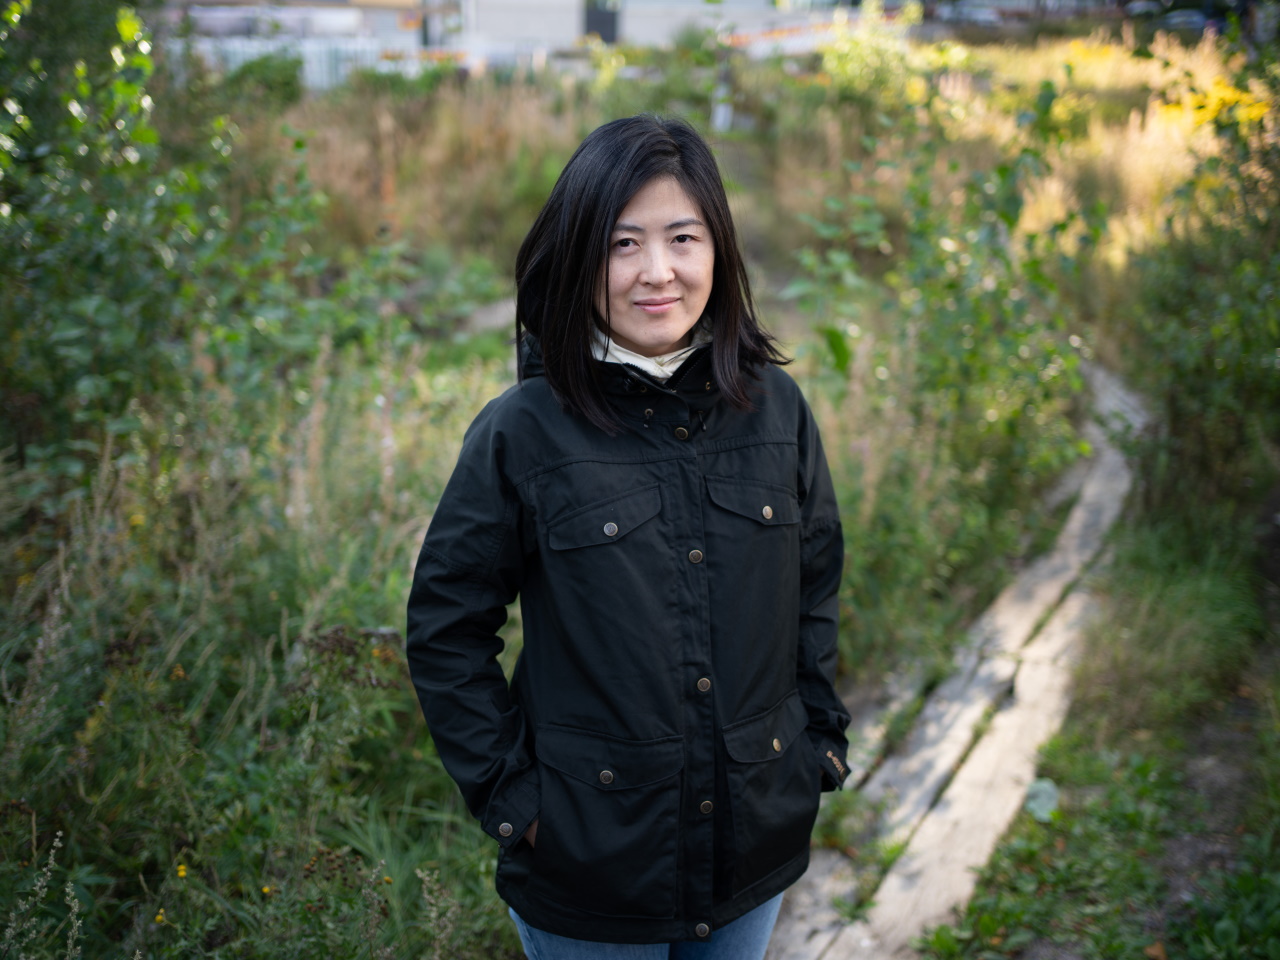 Xueli Jin, Software Engineer, has worked at Varian since 2019 and holds a Master of Science degree in Technology from Aalto University, Finland.